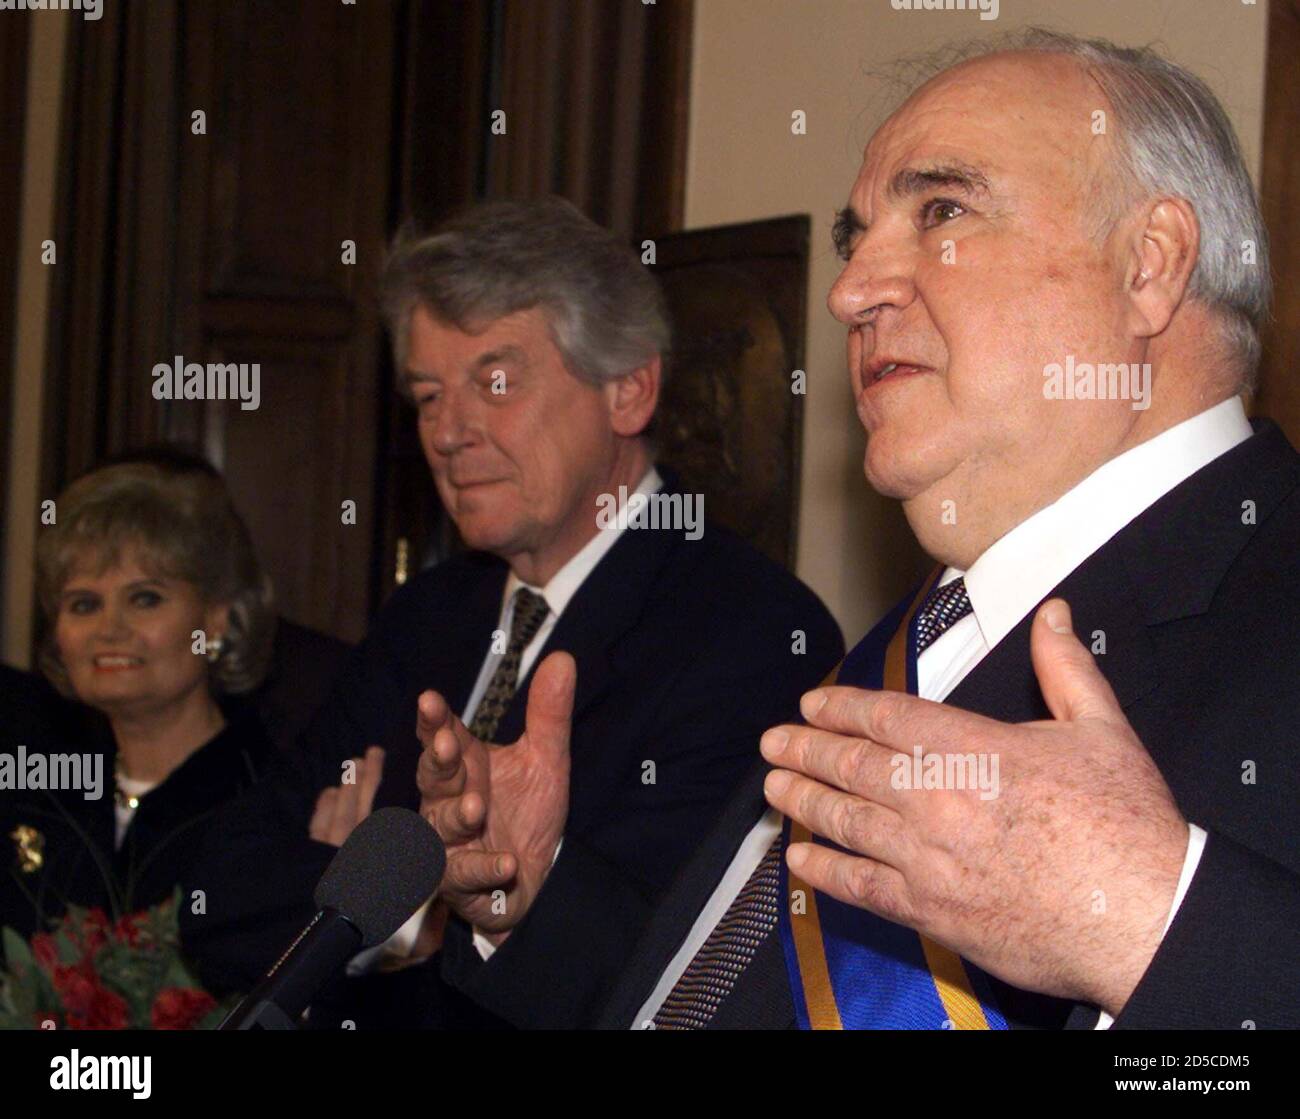 Former German Chancellor Helmut Kohl (R) gestures, while his wife, Hannelore Kohl (L) and Dutch Prime minister Wim Kok listen to his speech in The Hague January 13. During his farewell visit to The Netherlands Kohl was presented with a high Dutch award.  FEE/AA Stock Photo